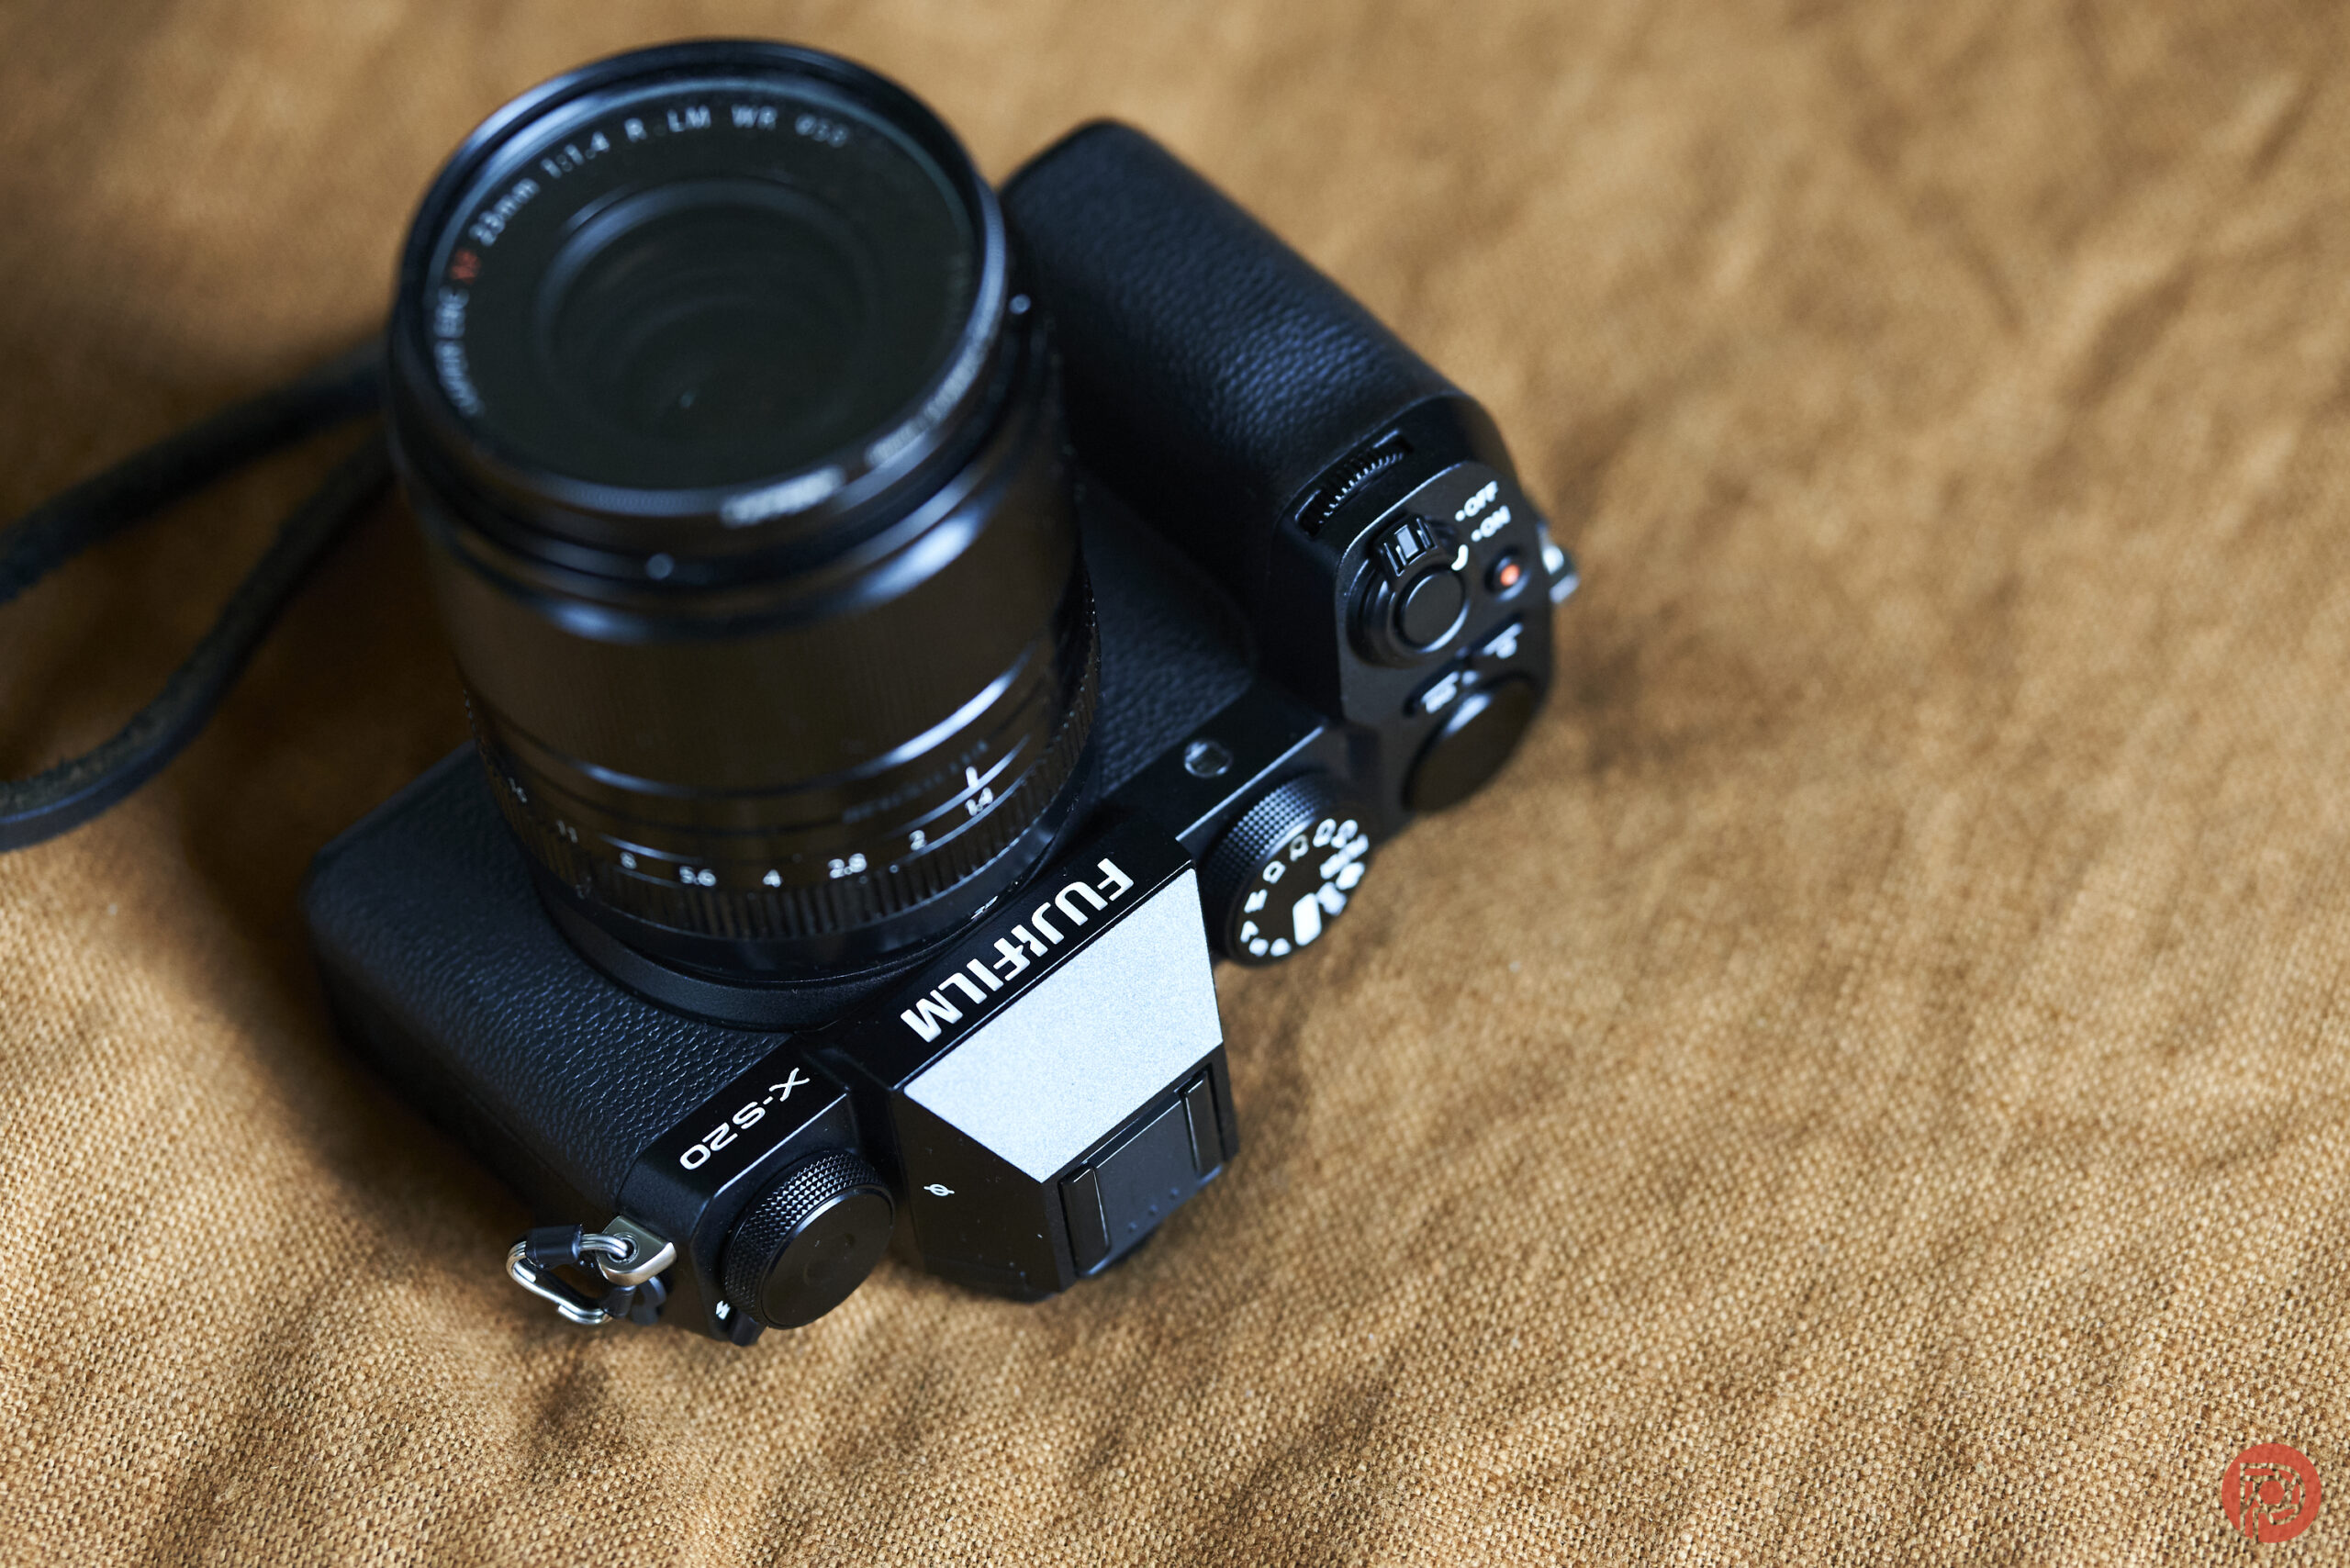 Chris Gampat The Phoblographer Viltrox 75mm f1.2 review edited 21-200s1600